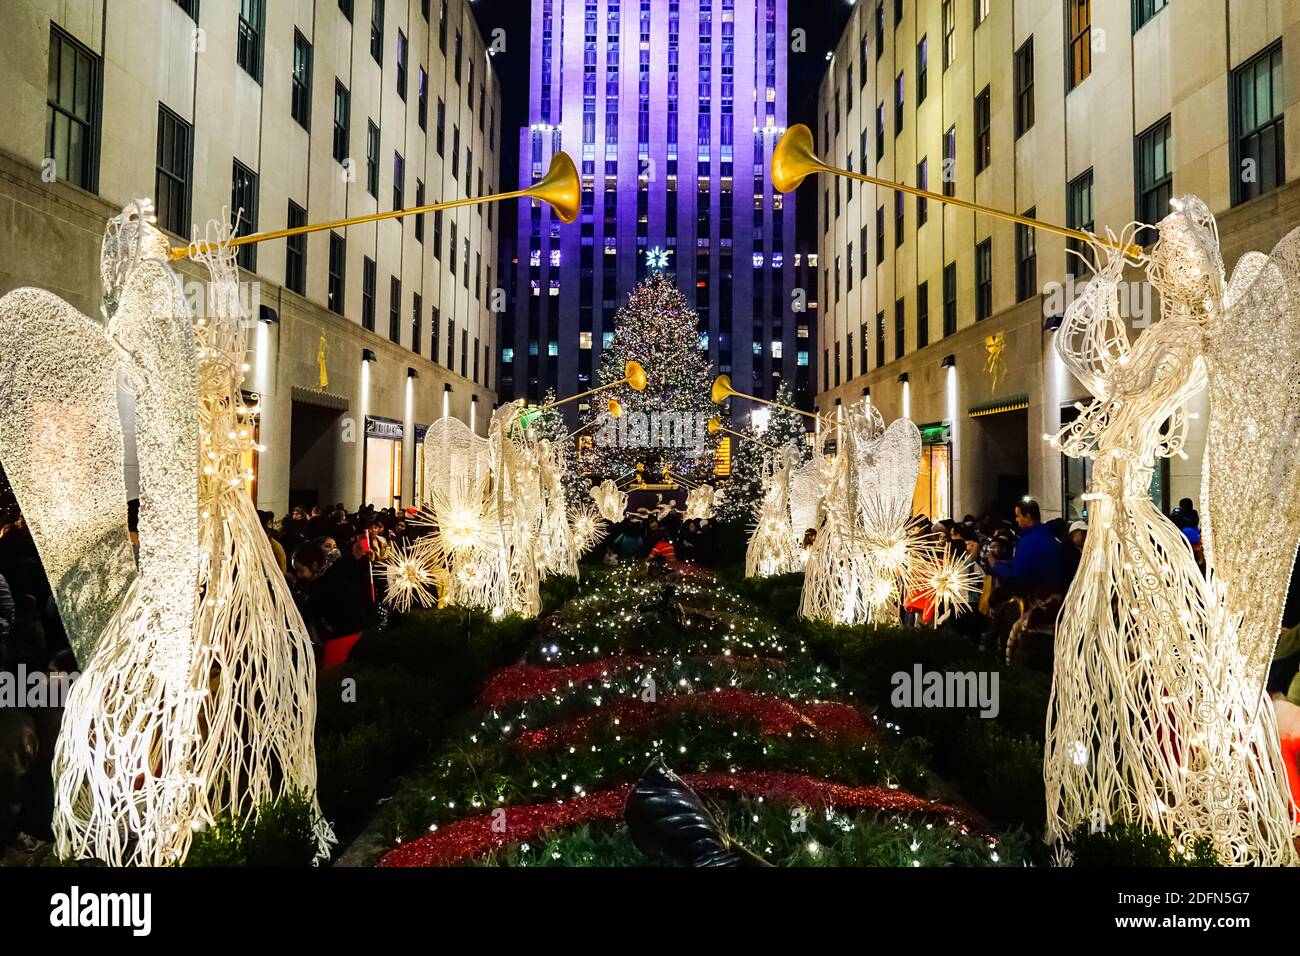 Rockefeller Center Christmas Tree and holiday decorations at the ...